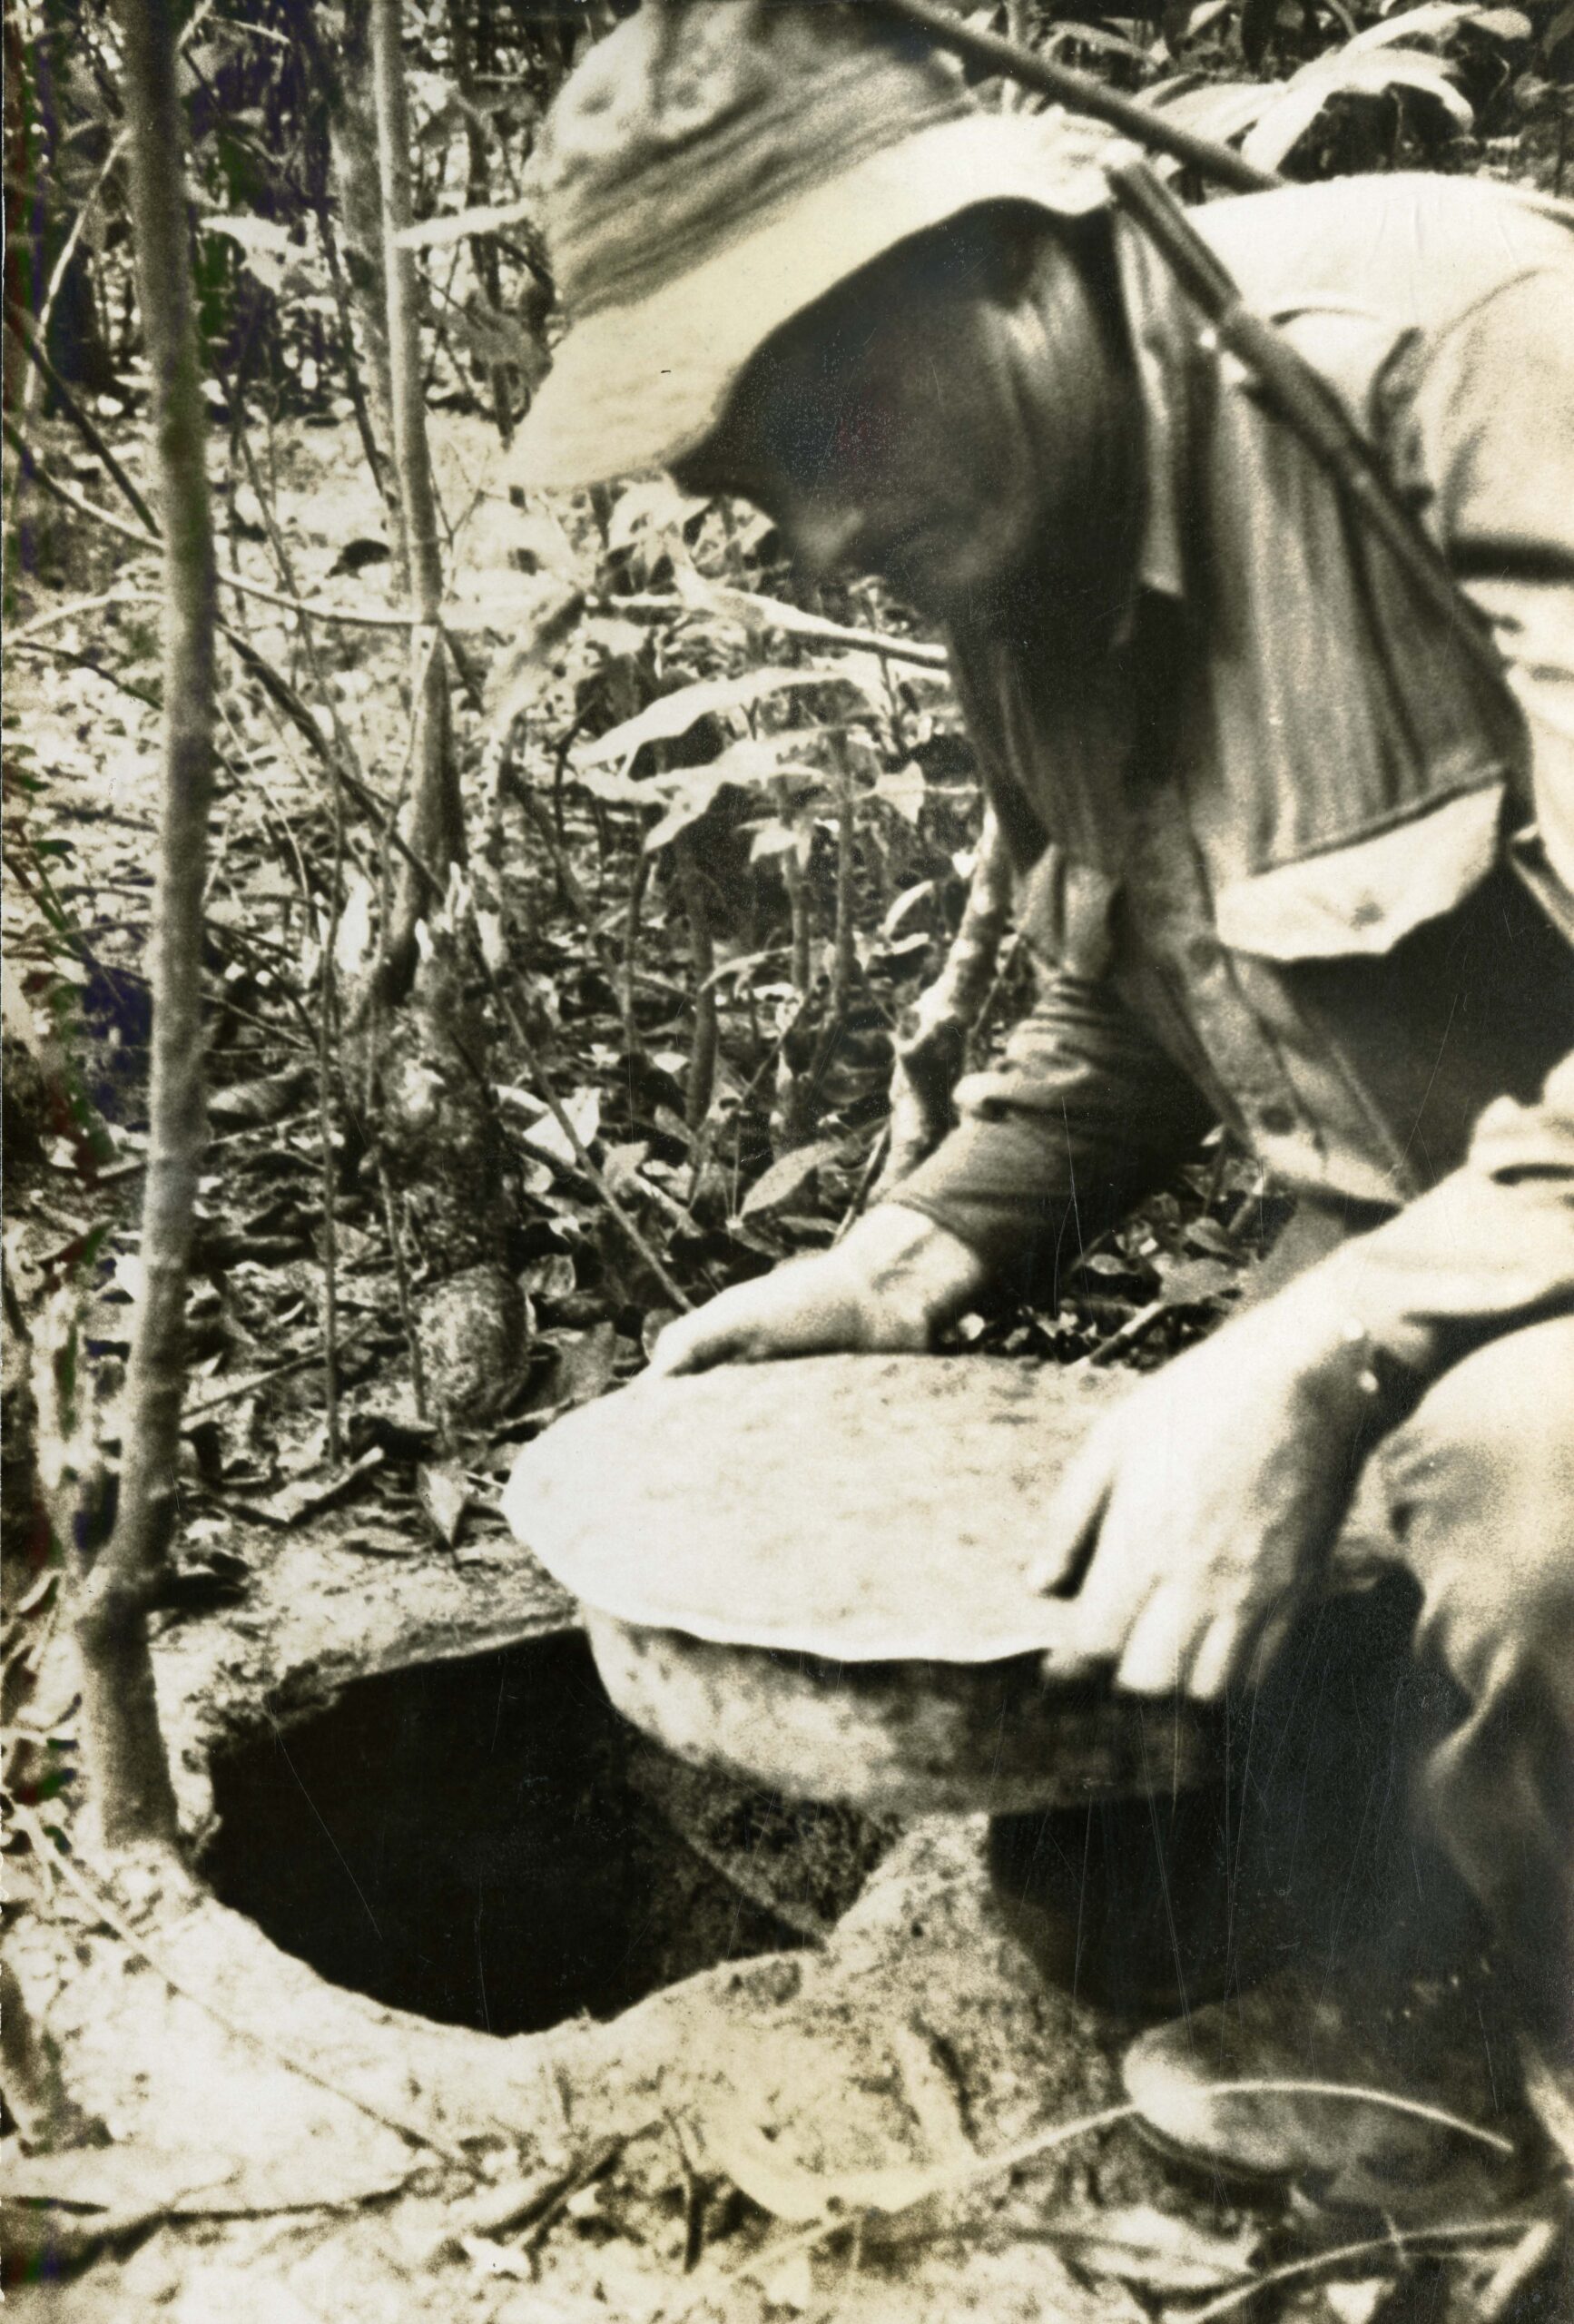 Royal Australian platoon sergeant removes Viet Cong tunnel cover, undated